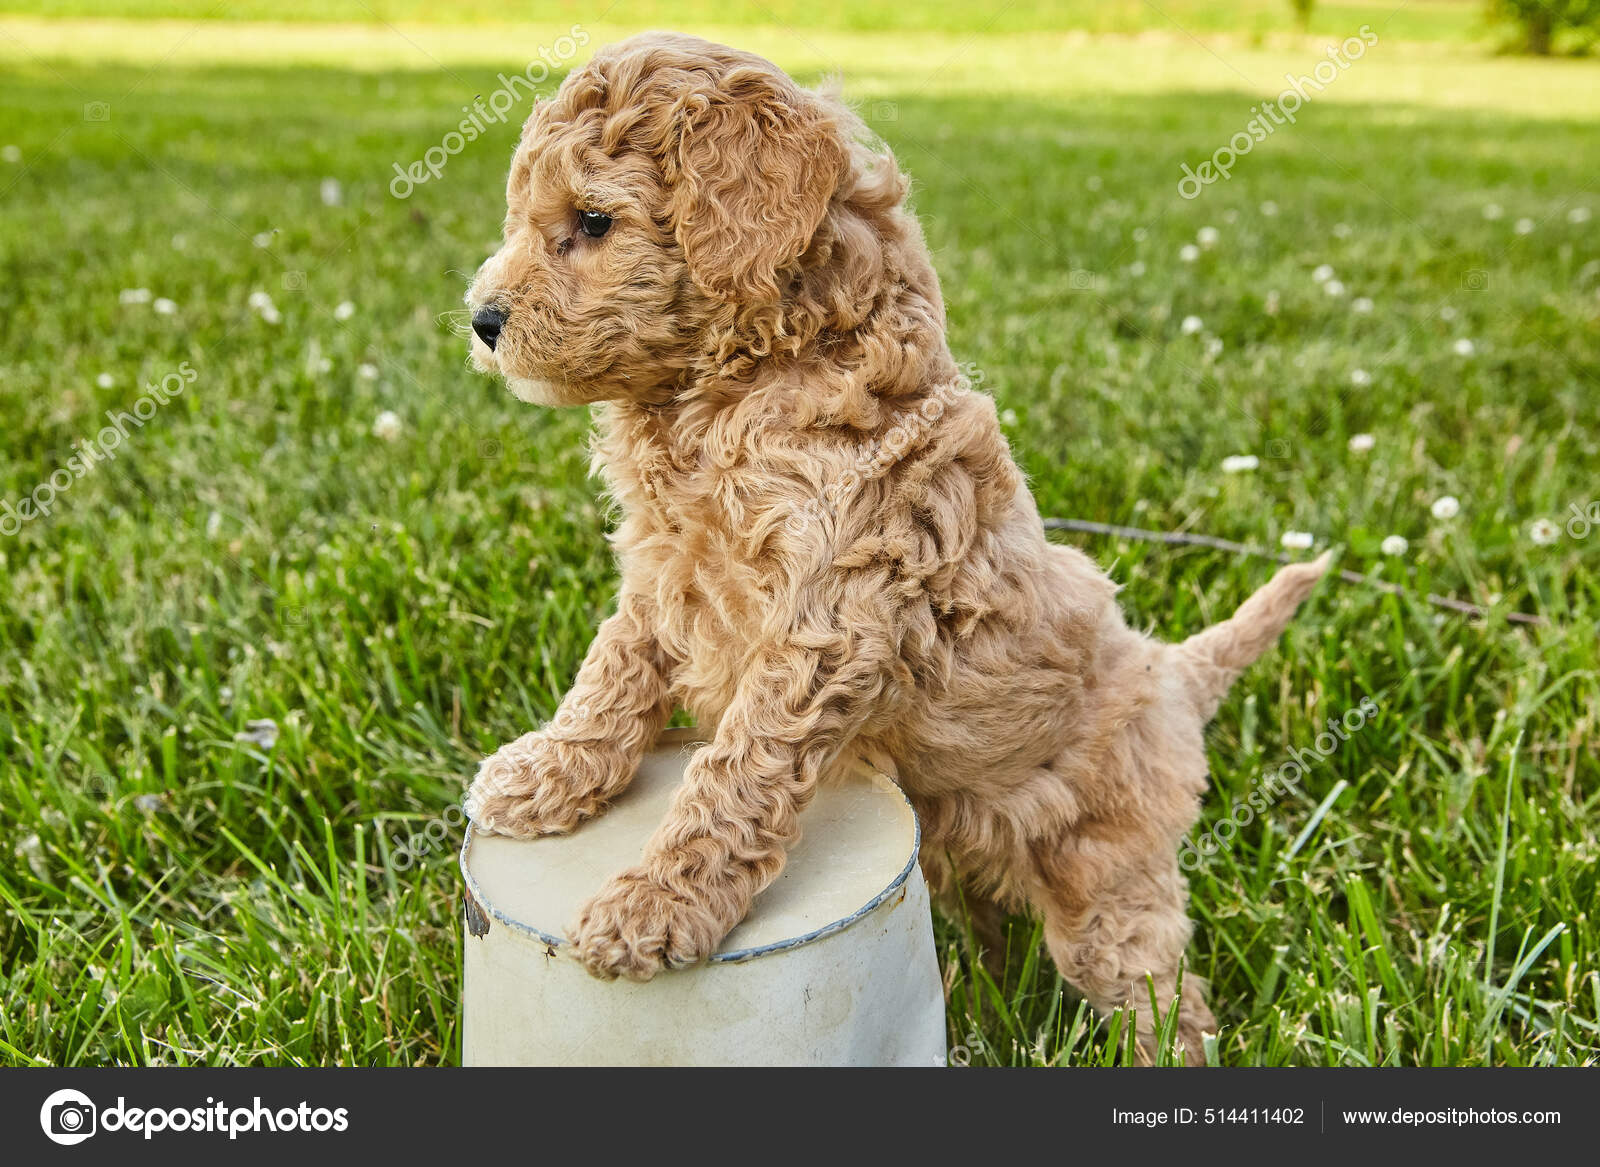 Goldendoodle puppy stepping over flowerpot in grass